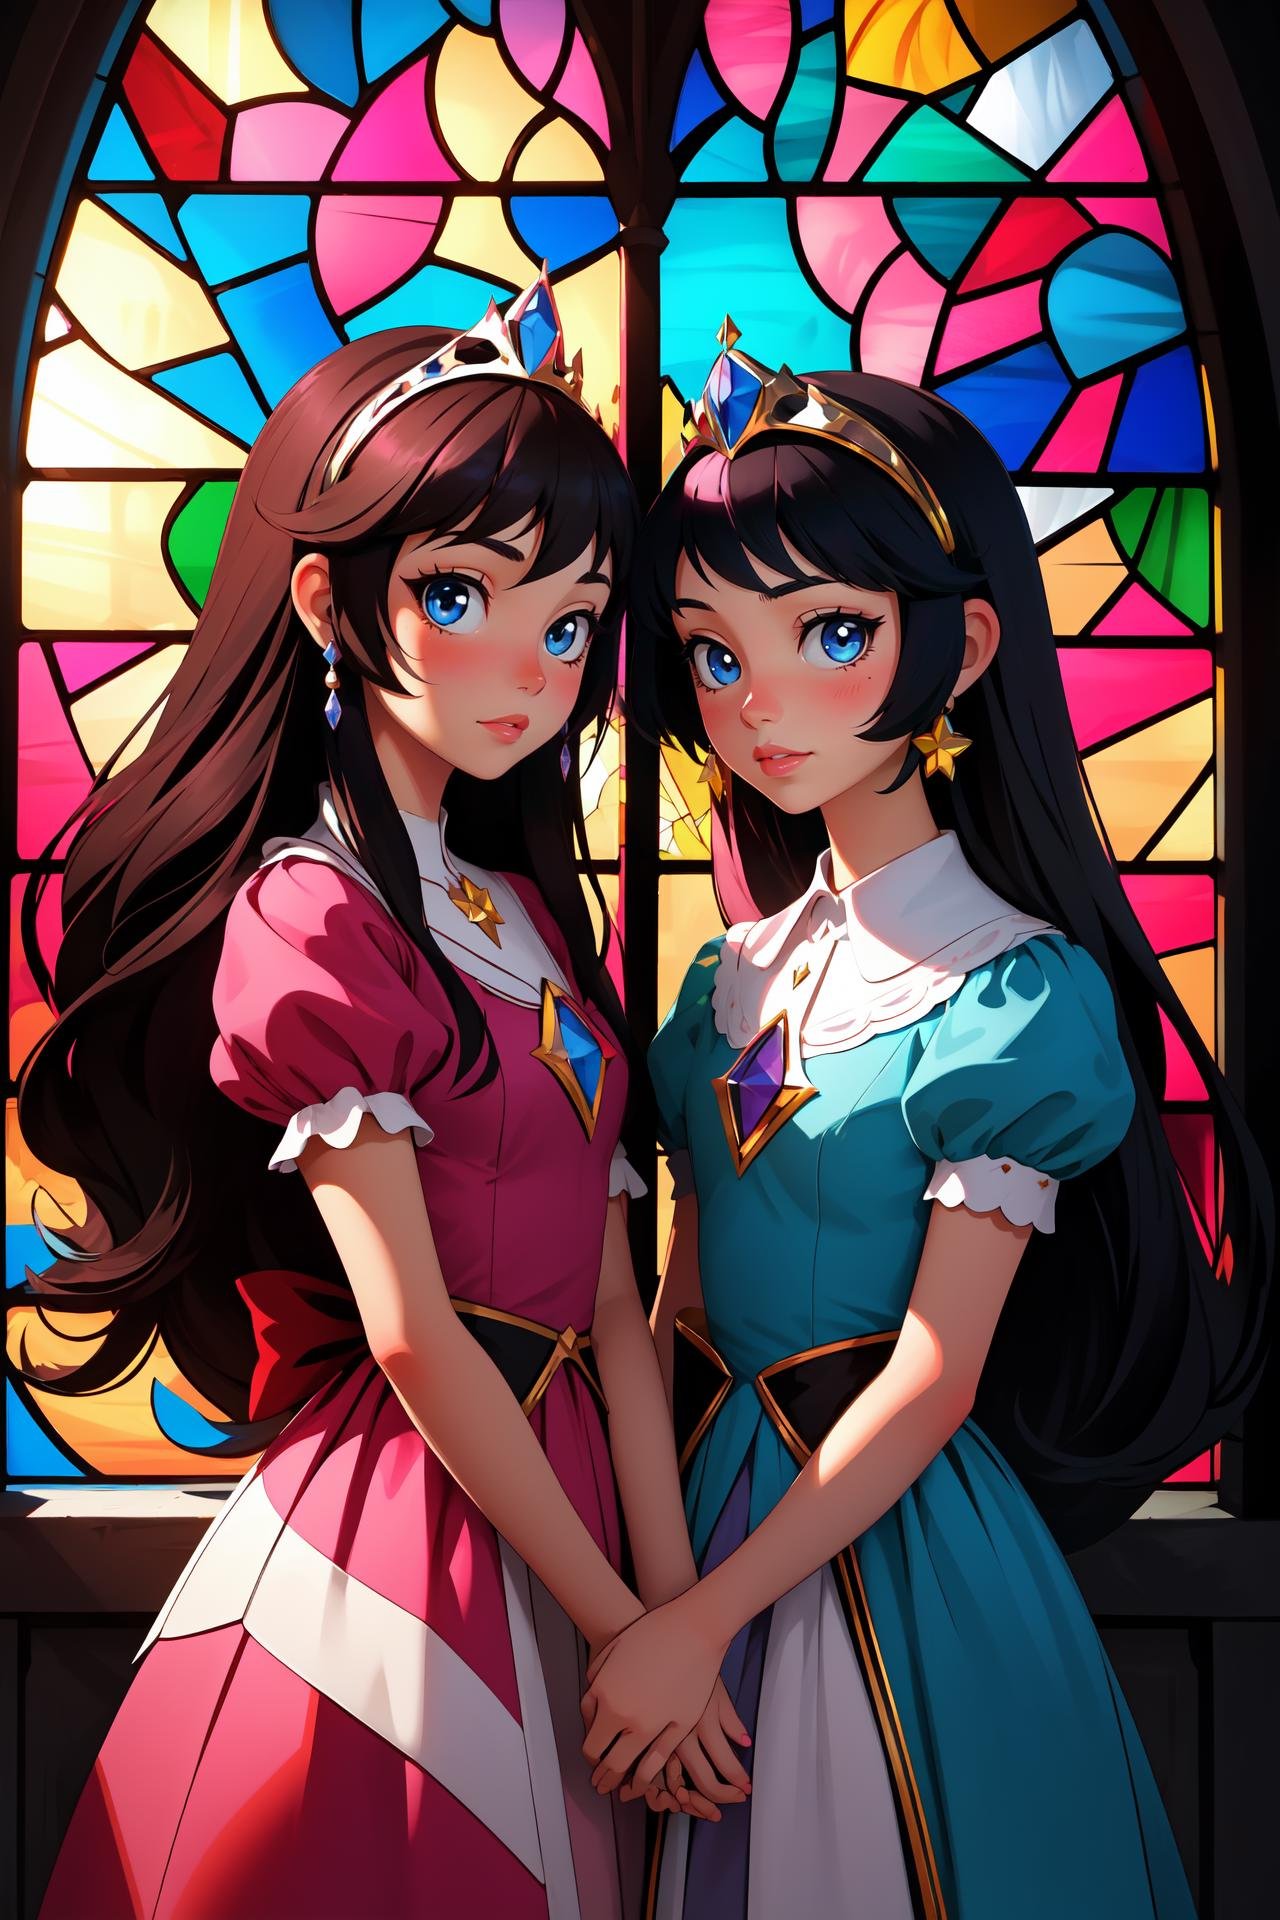 high quality, masterpiece, 2 girls, princesses, stained glass, pink, blue